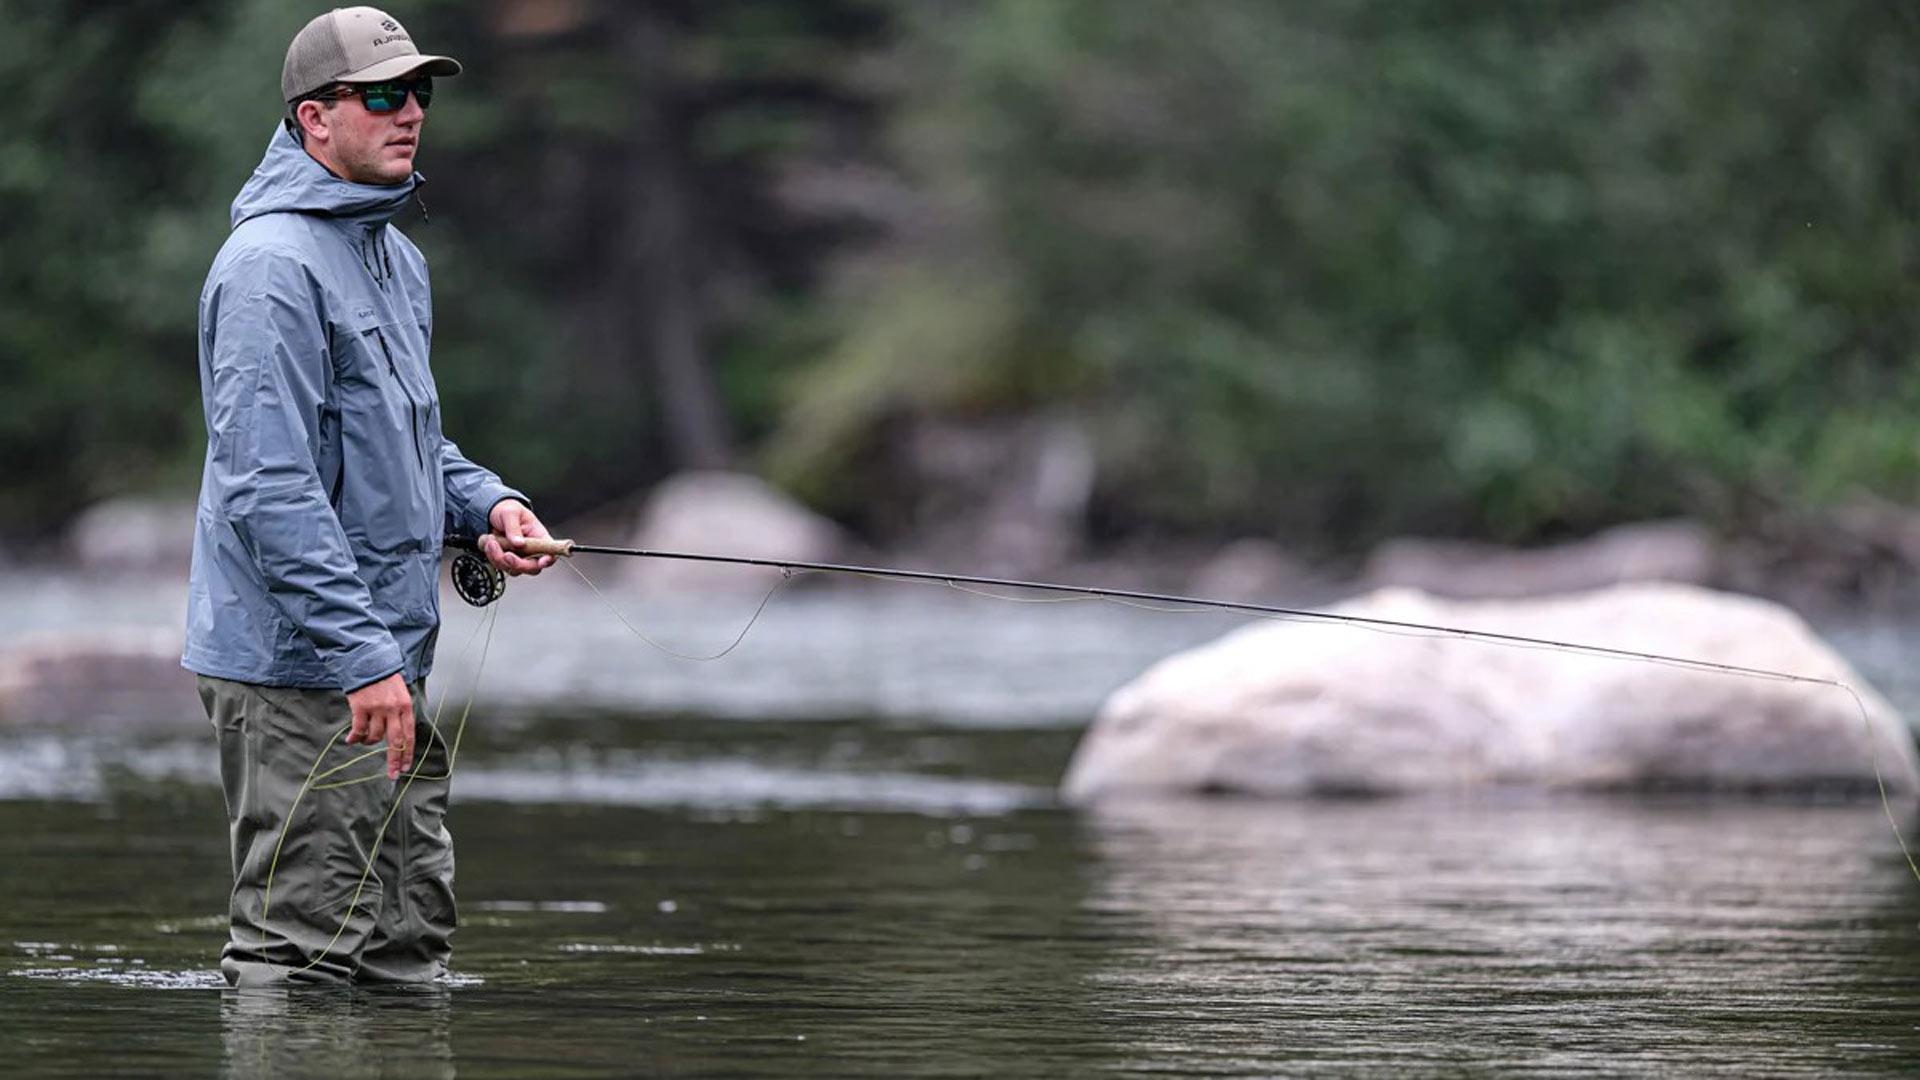 Vail Valley Anglers in Edwards, CO